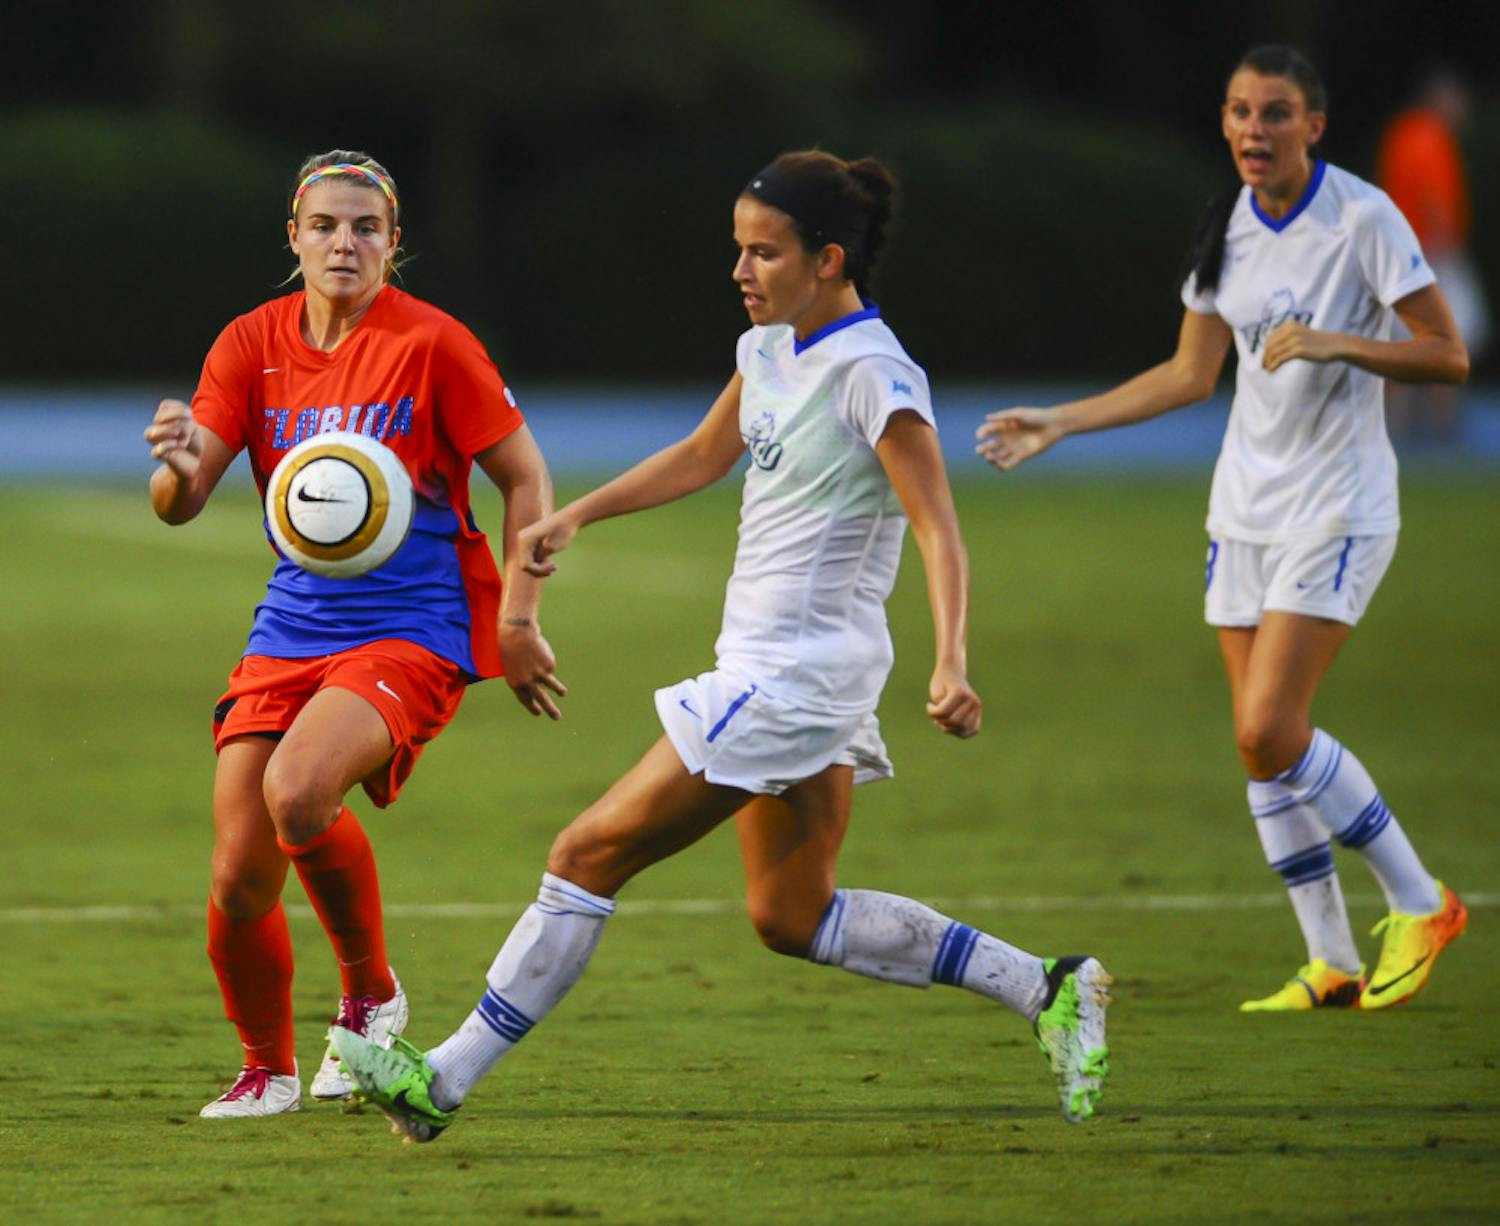 Freshman forward Savannah Jordan fights for possession of the ball during Florida's 3-1 win against Florida Gulf Coast on Aug. 23 night at James G. Pressly Stadium.